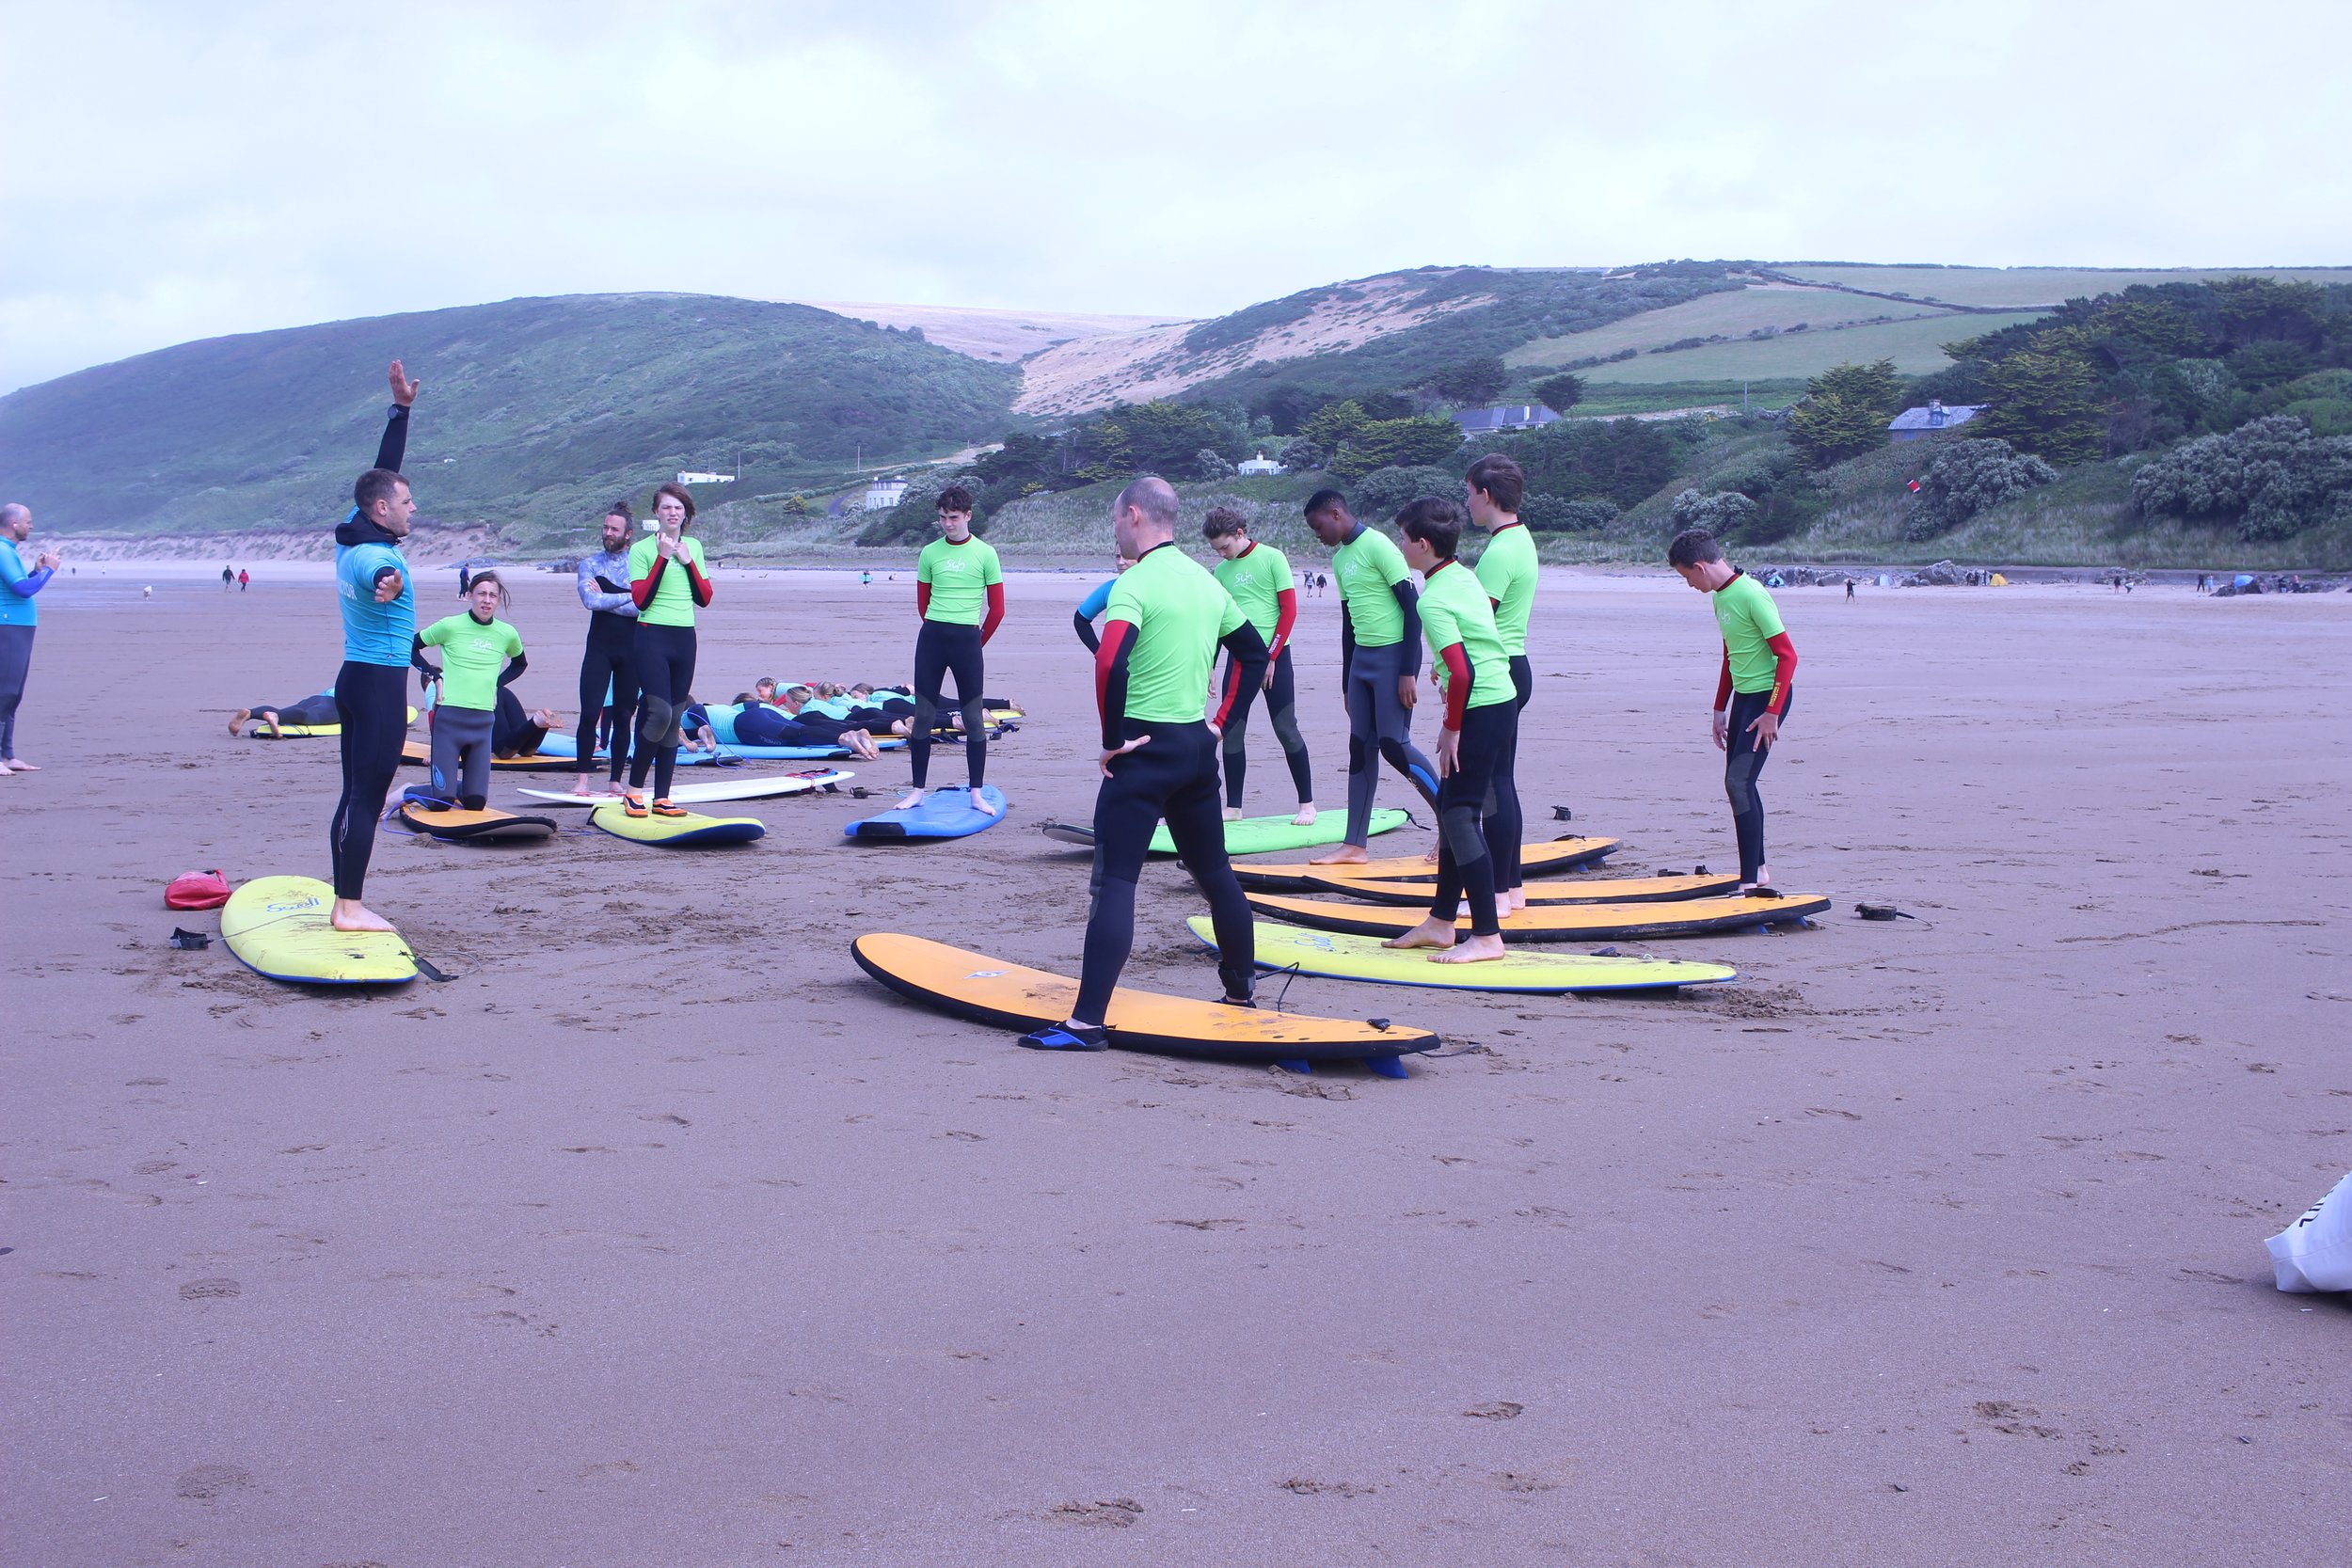 Surfing instruction for all abilities - beginners welcome